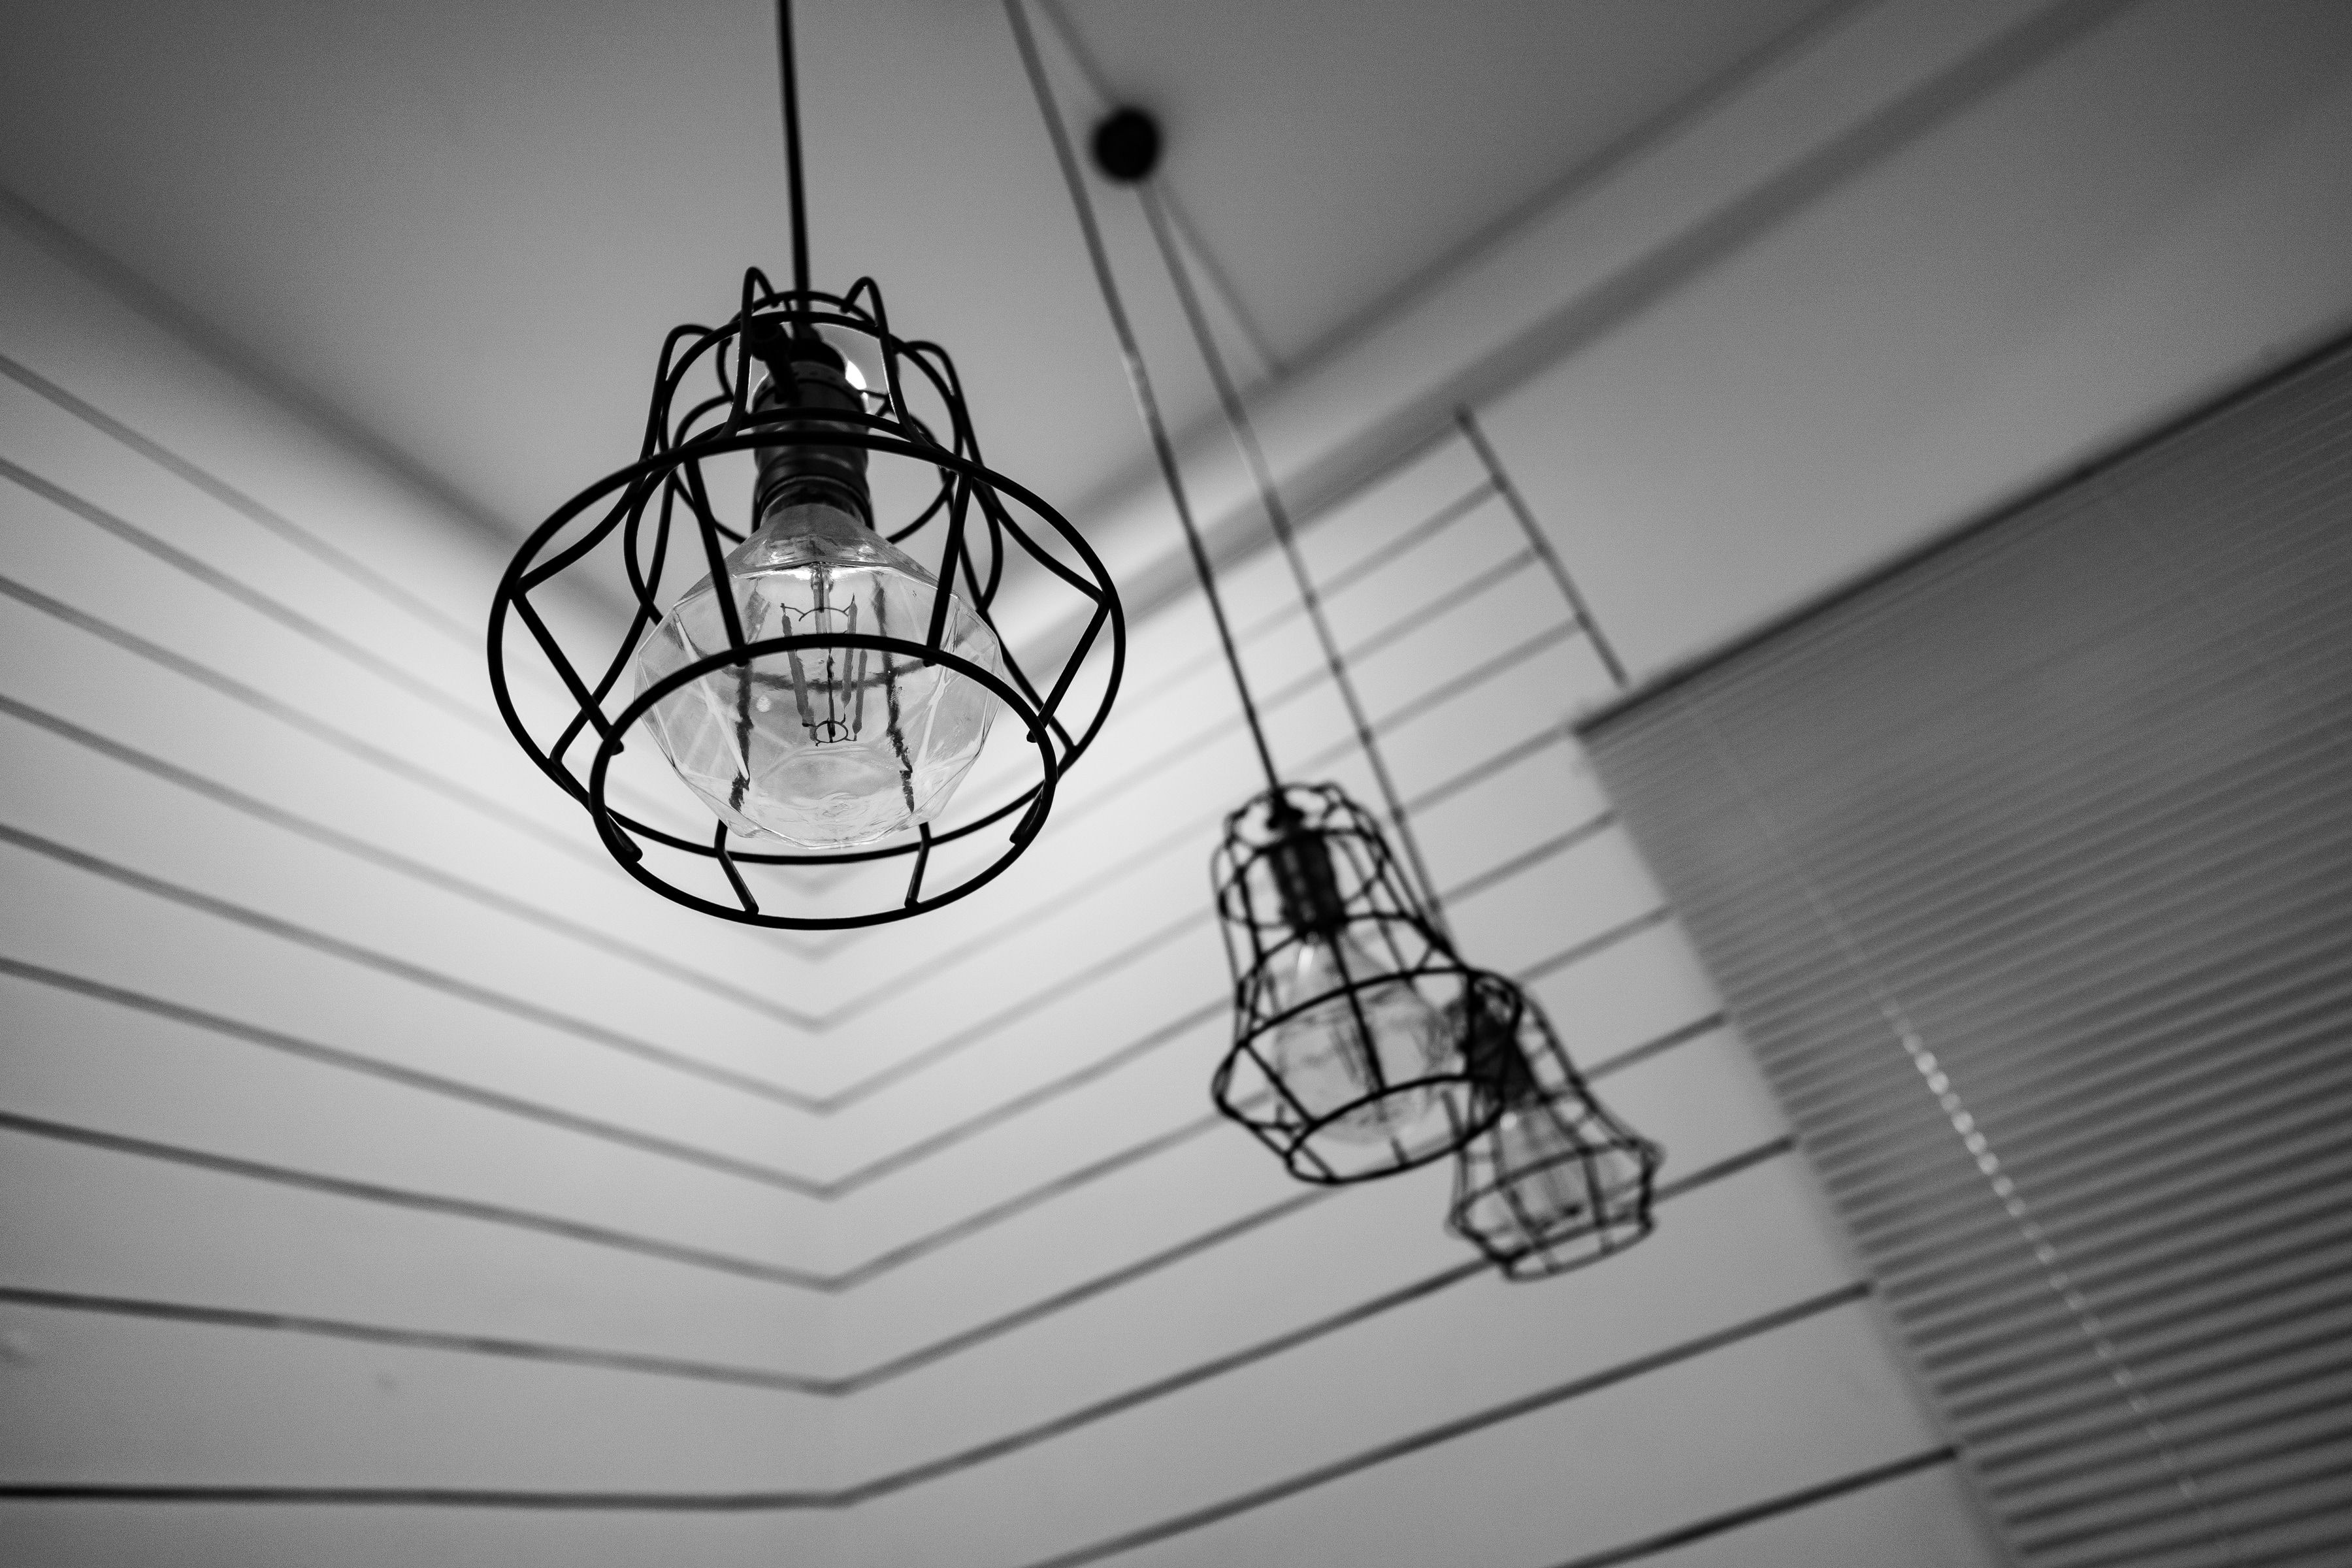 black and white, light, lamp, interior, low angle view, hanging